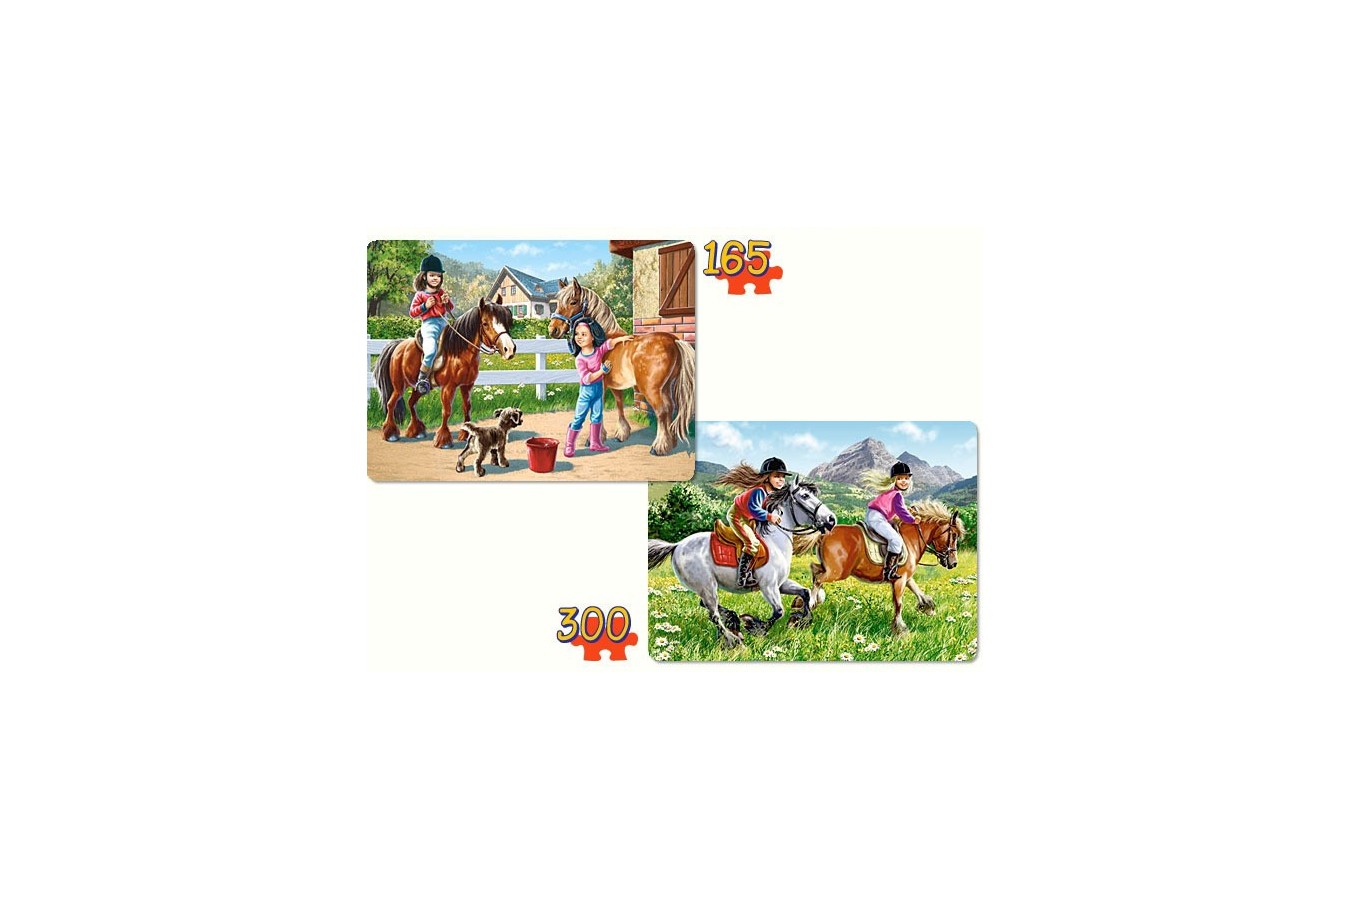 Puzzle Castorland 2 in 1 - Riding Horses, 165/300 Piese